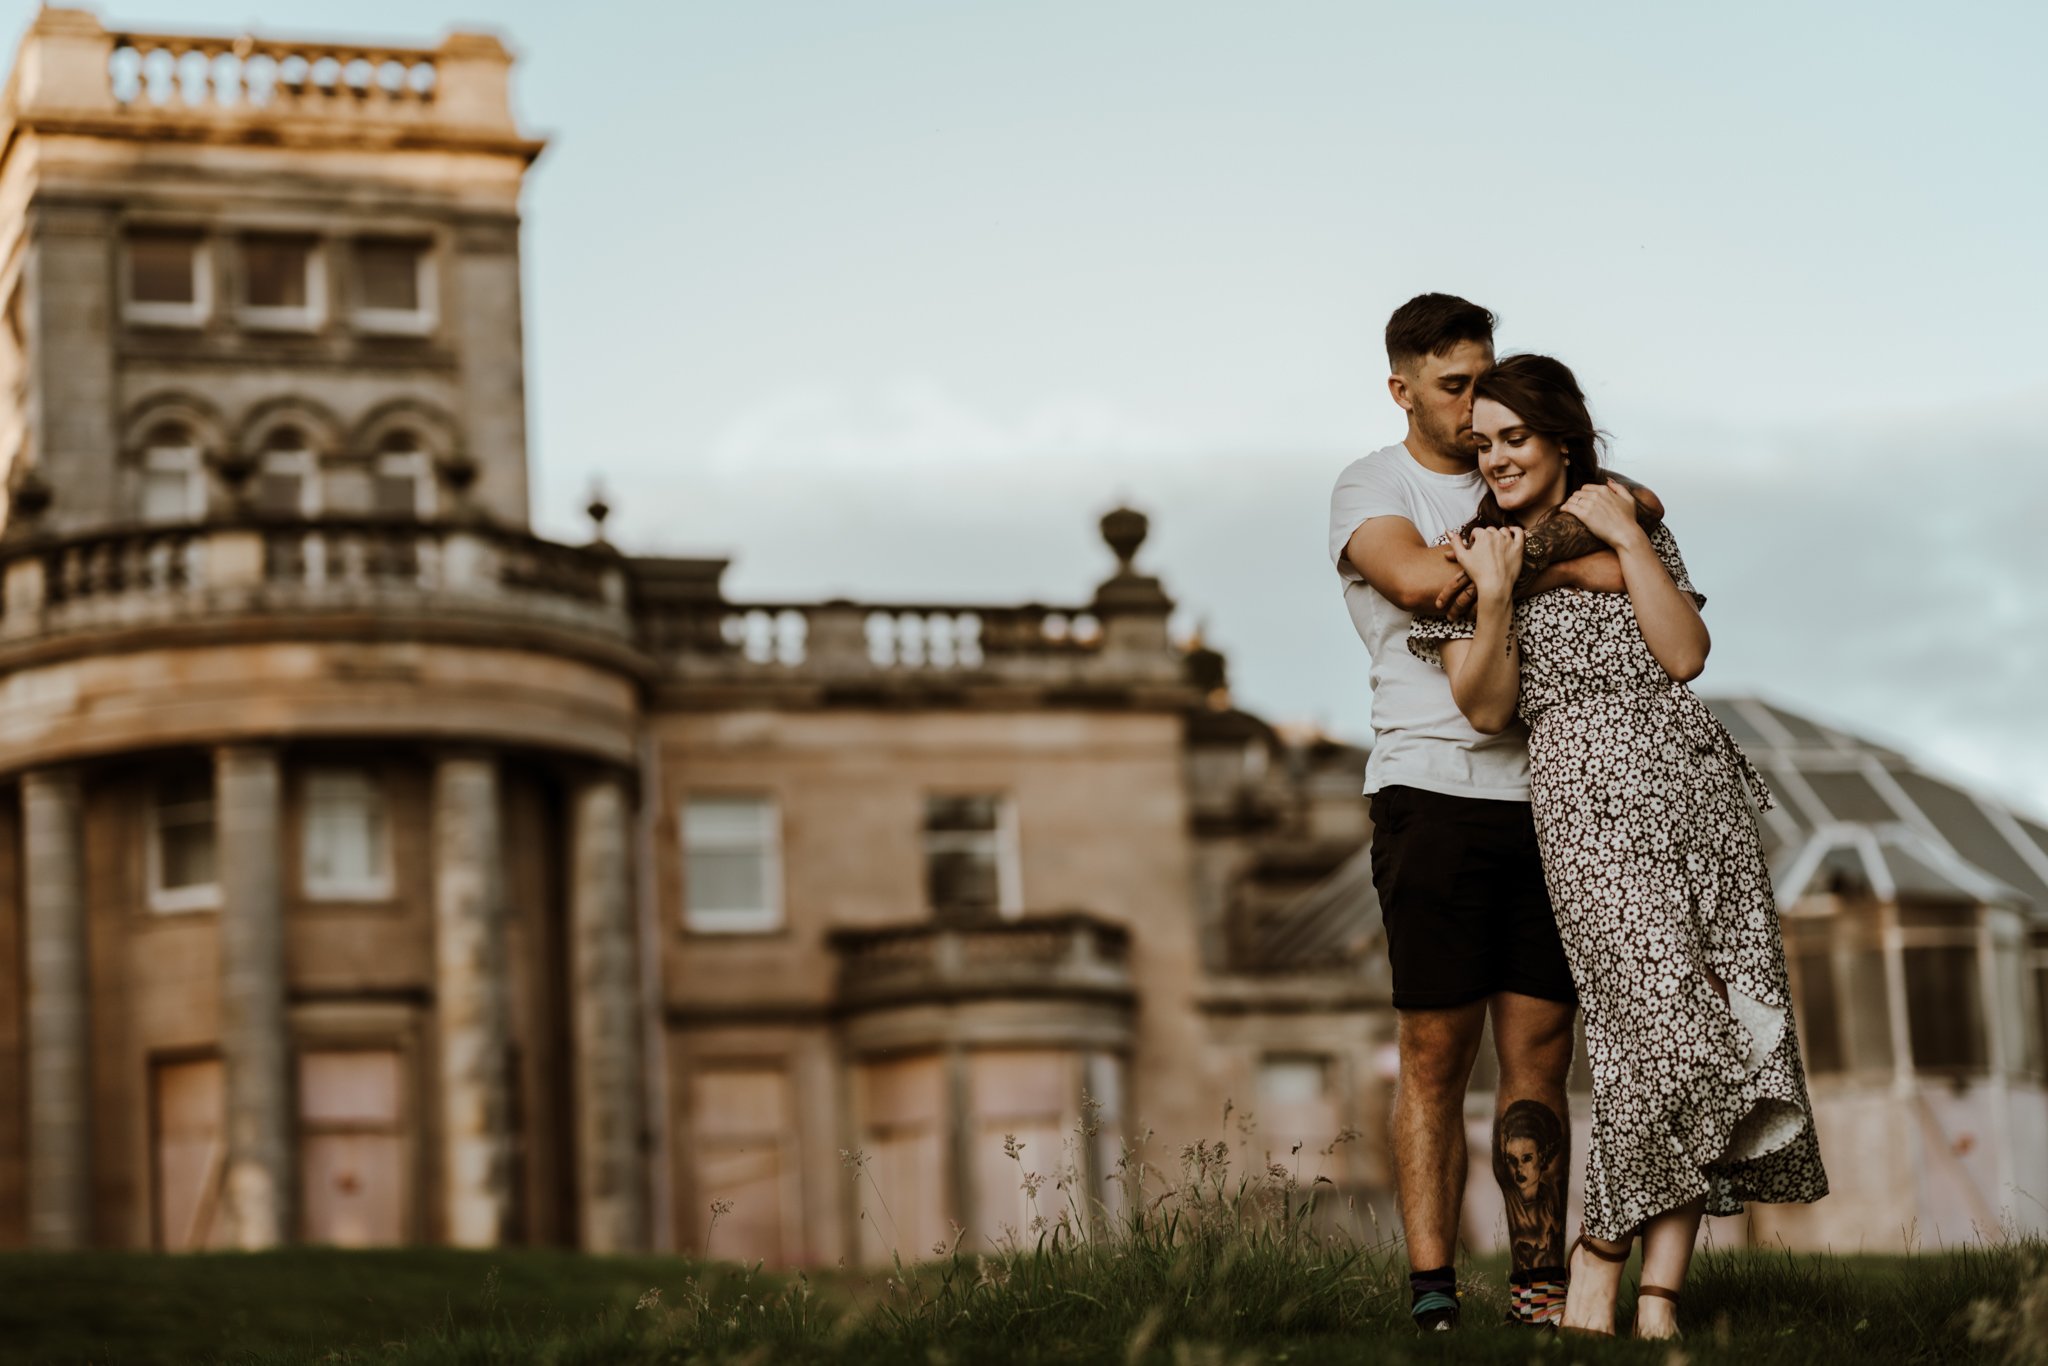 Angus Scotland Engagement and Wedding Photographer - Emily and Gabriel - Adventure Couple Session86.jpg